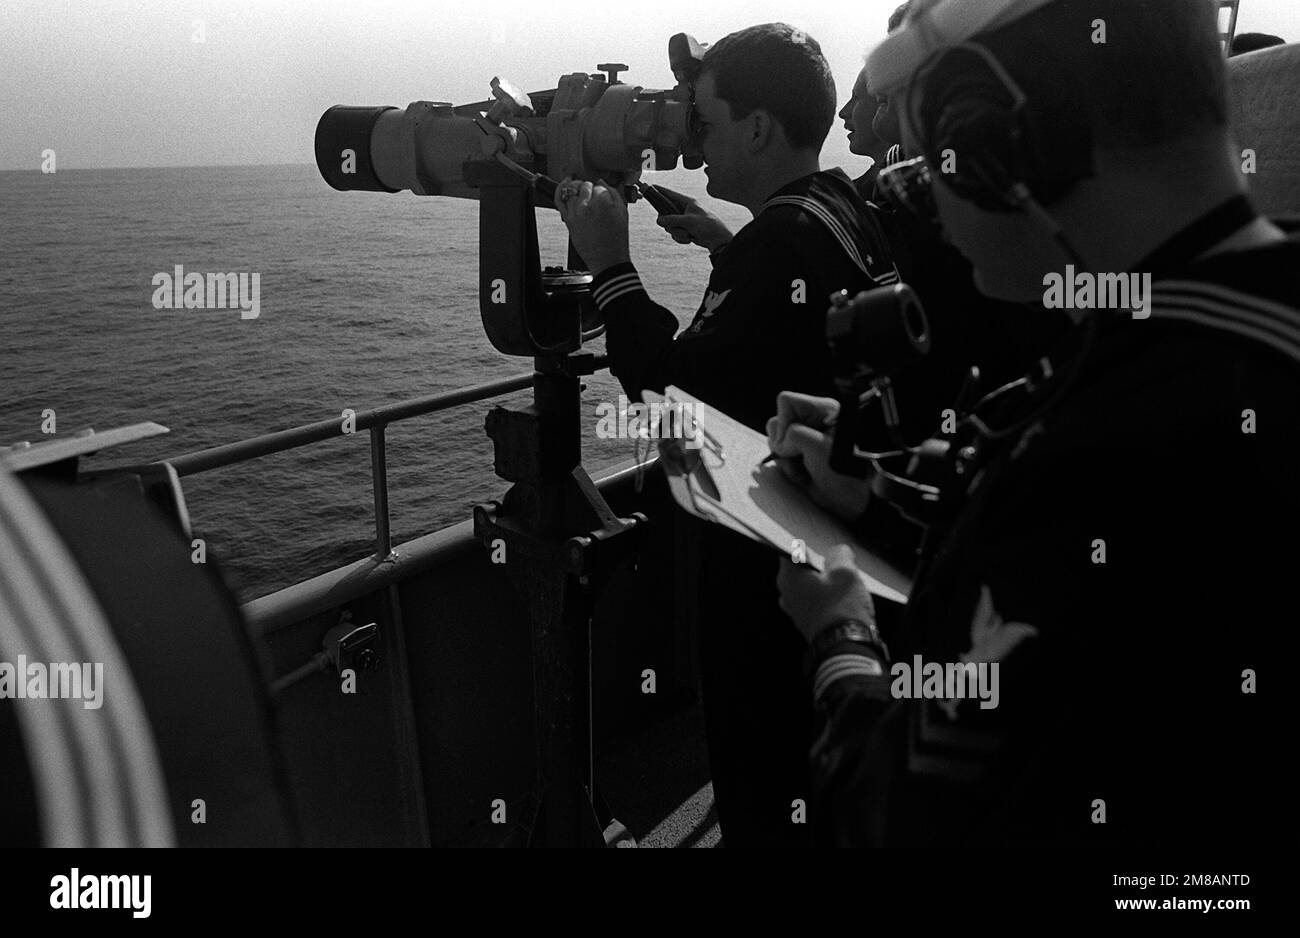 The intelligence team aboard the battleship USS MISSOURI (BB-63) checks information as they observe a Soviet Intelligence collector ship shadowing the MISSOURI. Country: Pacific Ocean (POC) Stock Photo